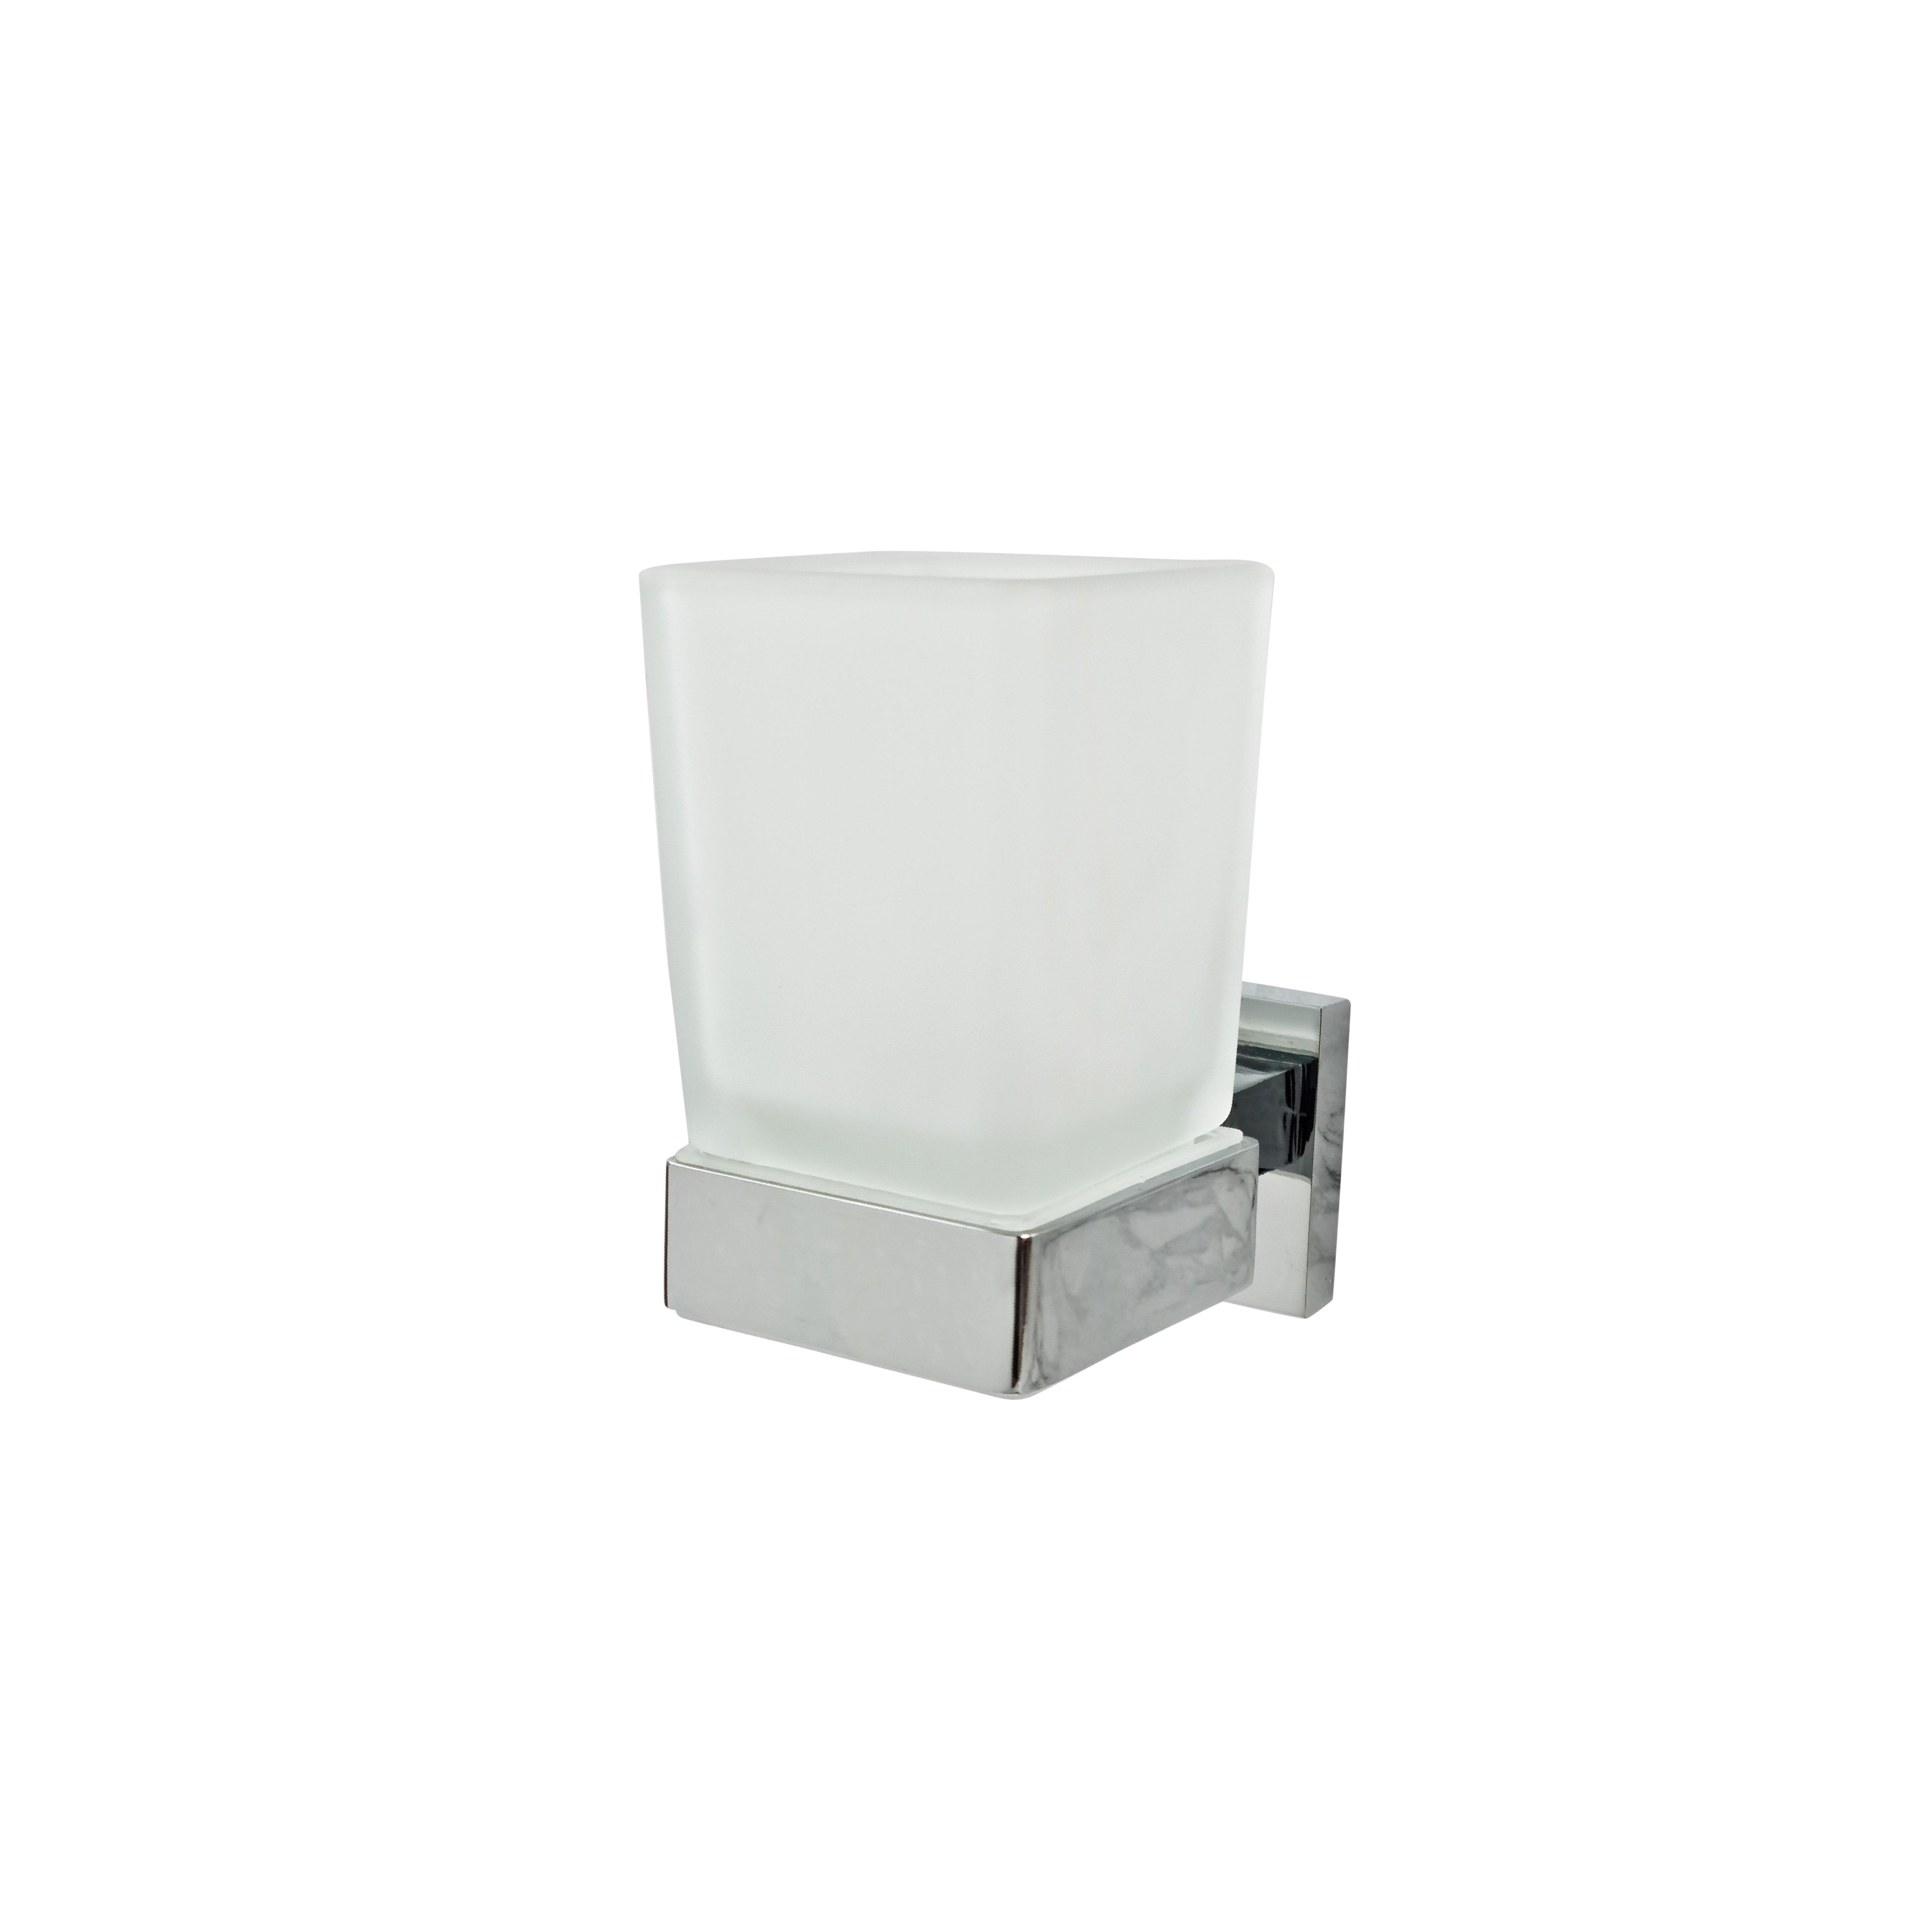 Chrome Toothbrush Holder with Glass Cup Wall Mounted Bathroom Accessories - image 1